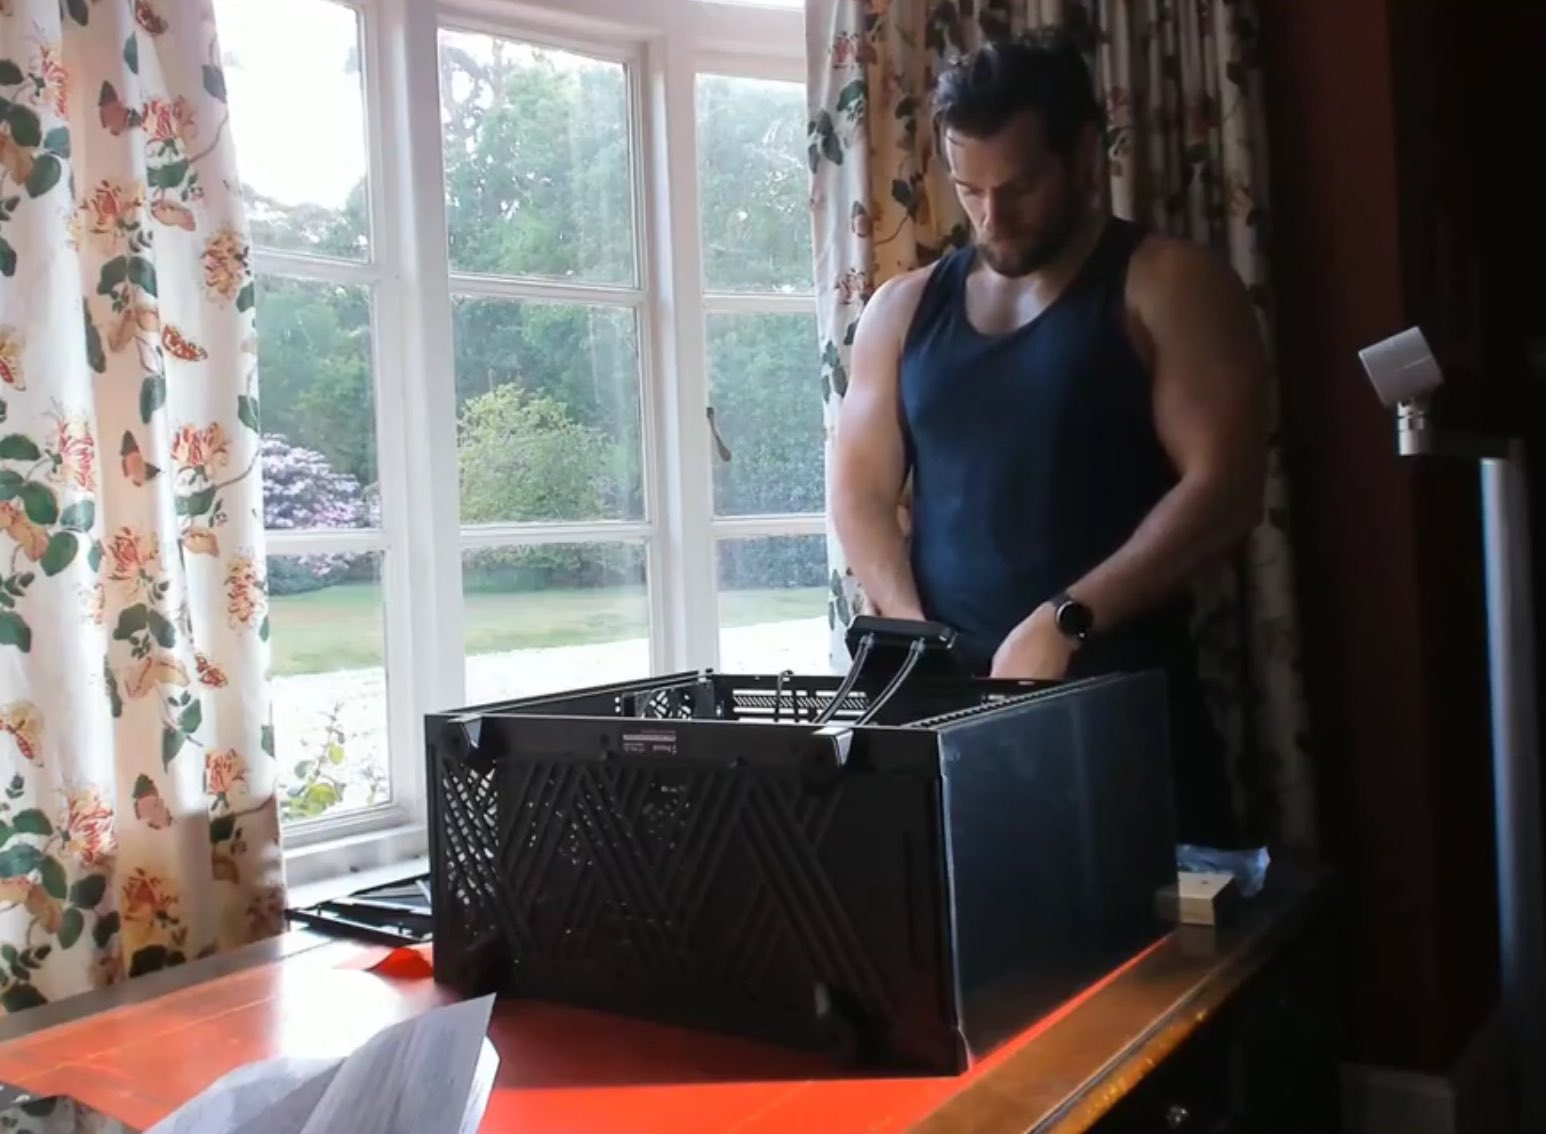 “Glad we all agree that the video of Henry Cavill building a pc in a tank t...